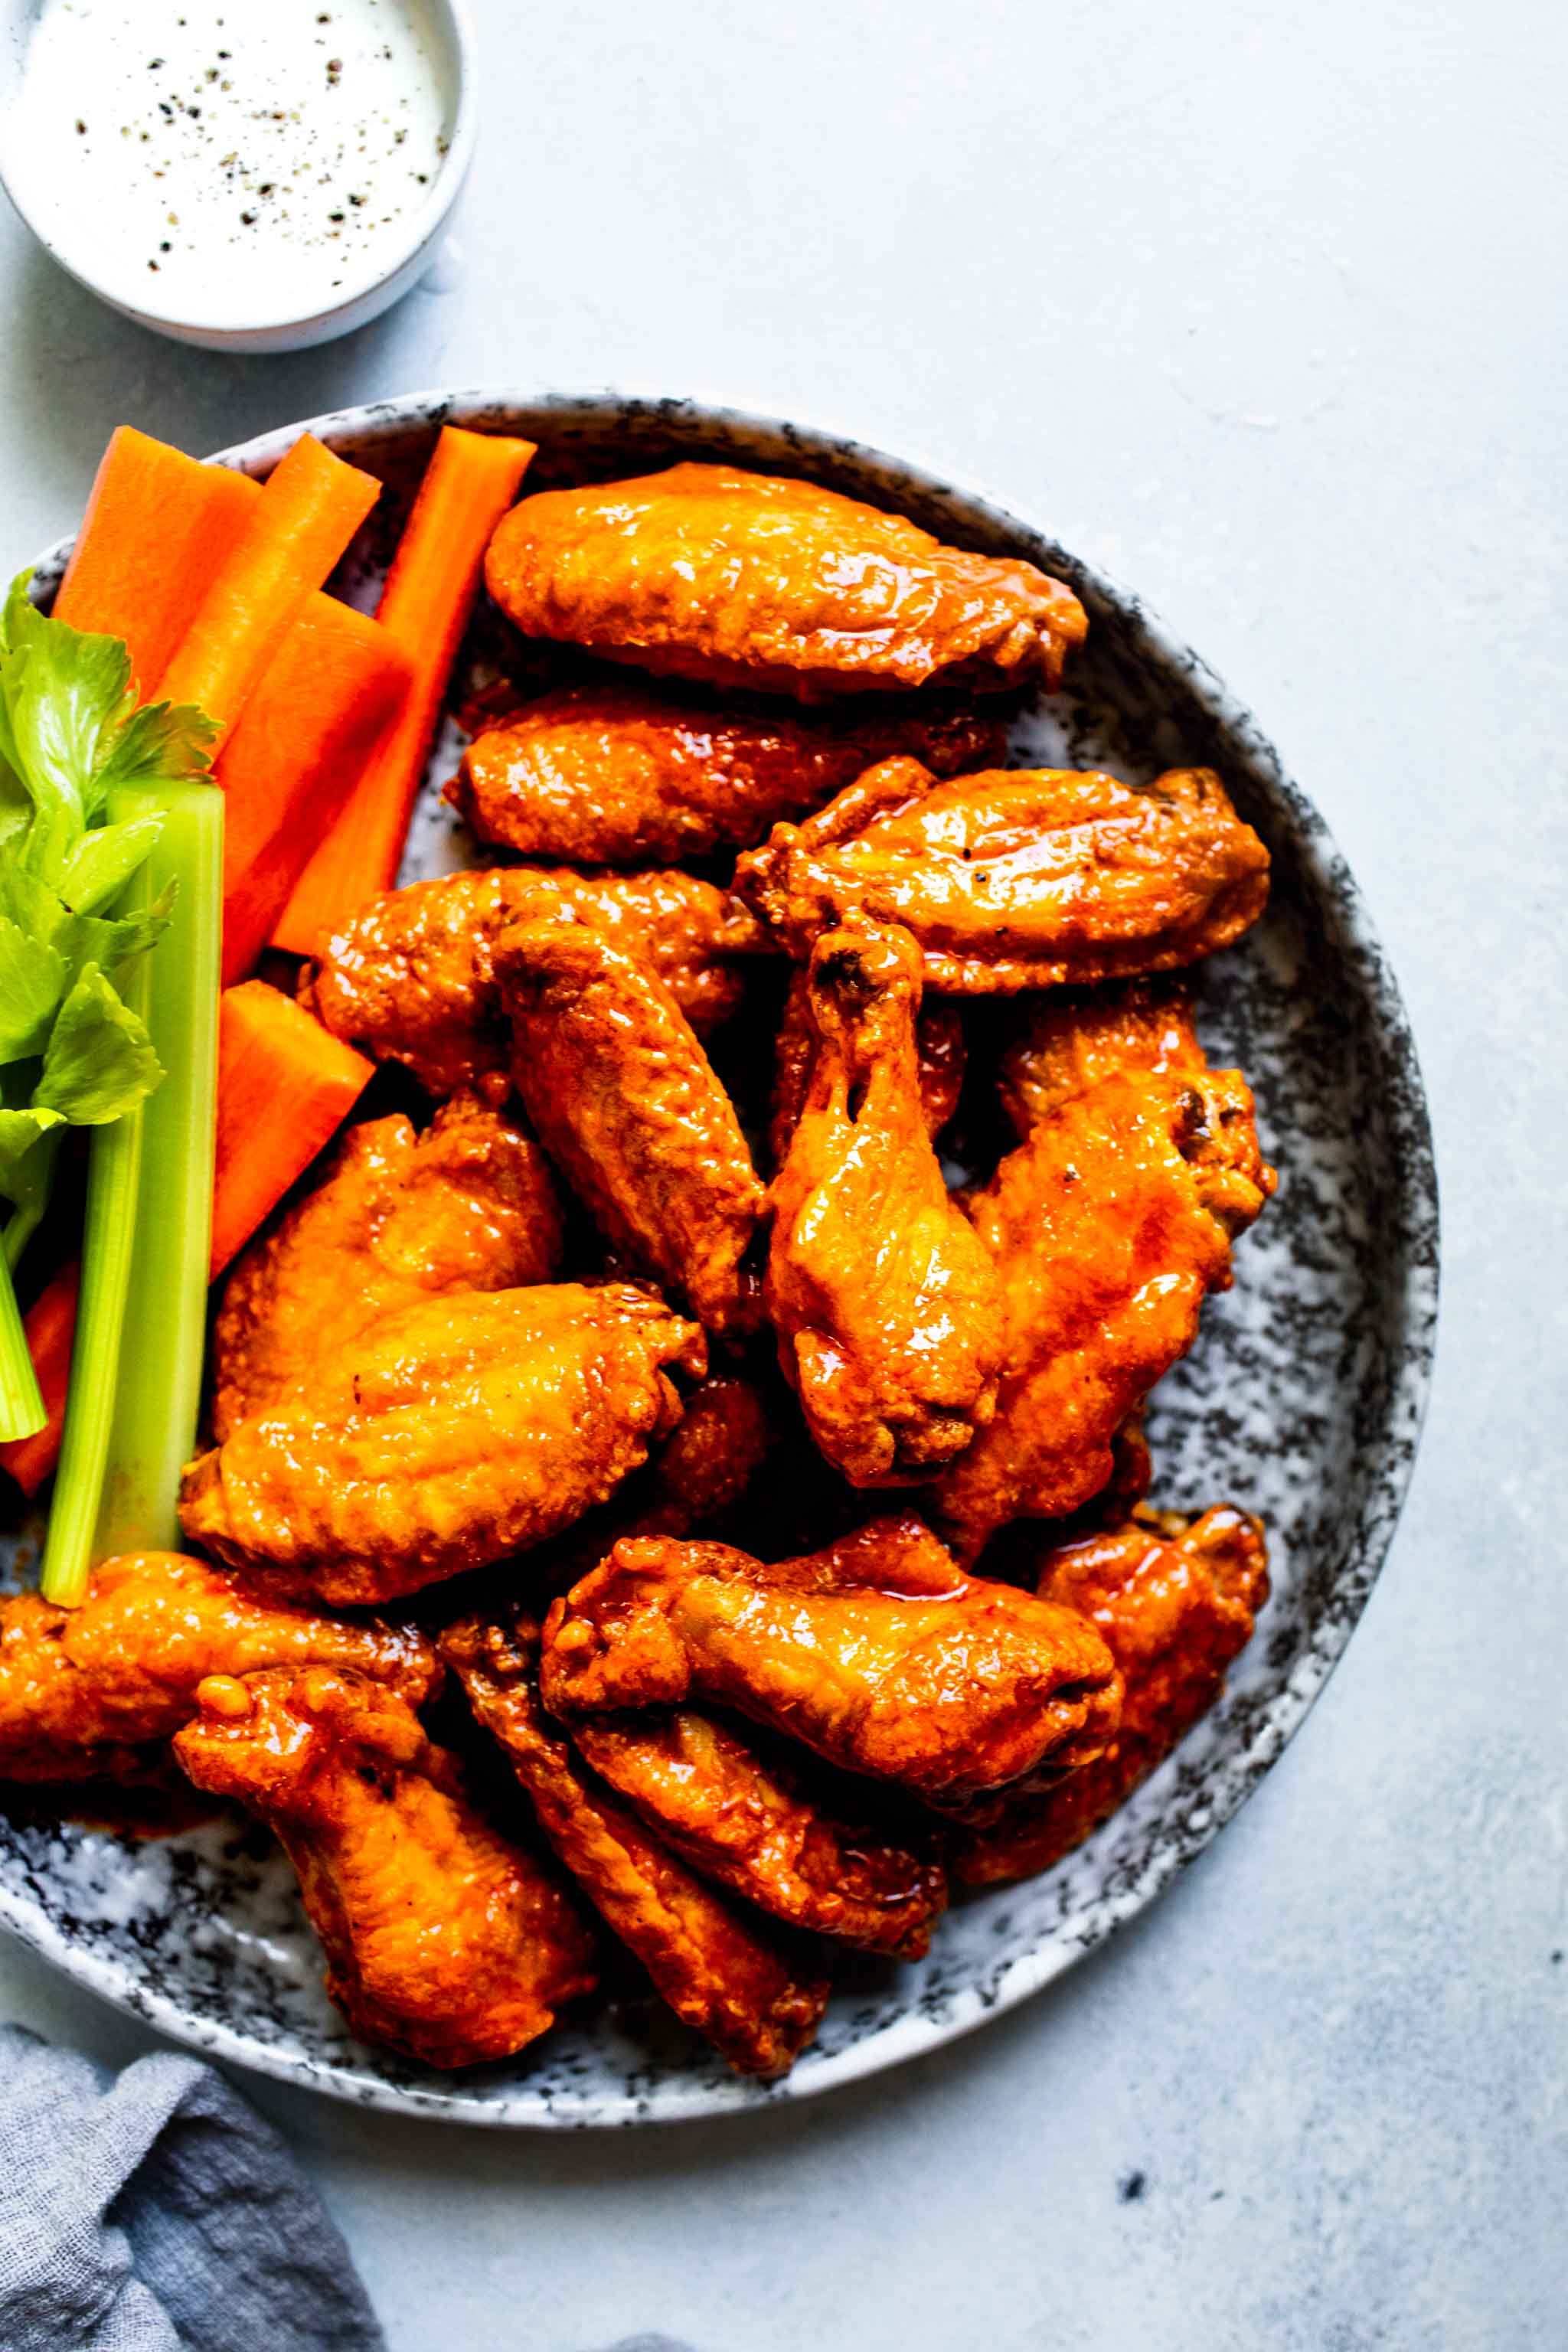 Baked buffalo wings coated in buffalo sauce on grey speckled plate next to blue cheese and celery sticks.